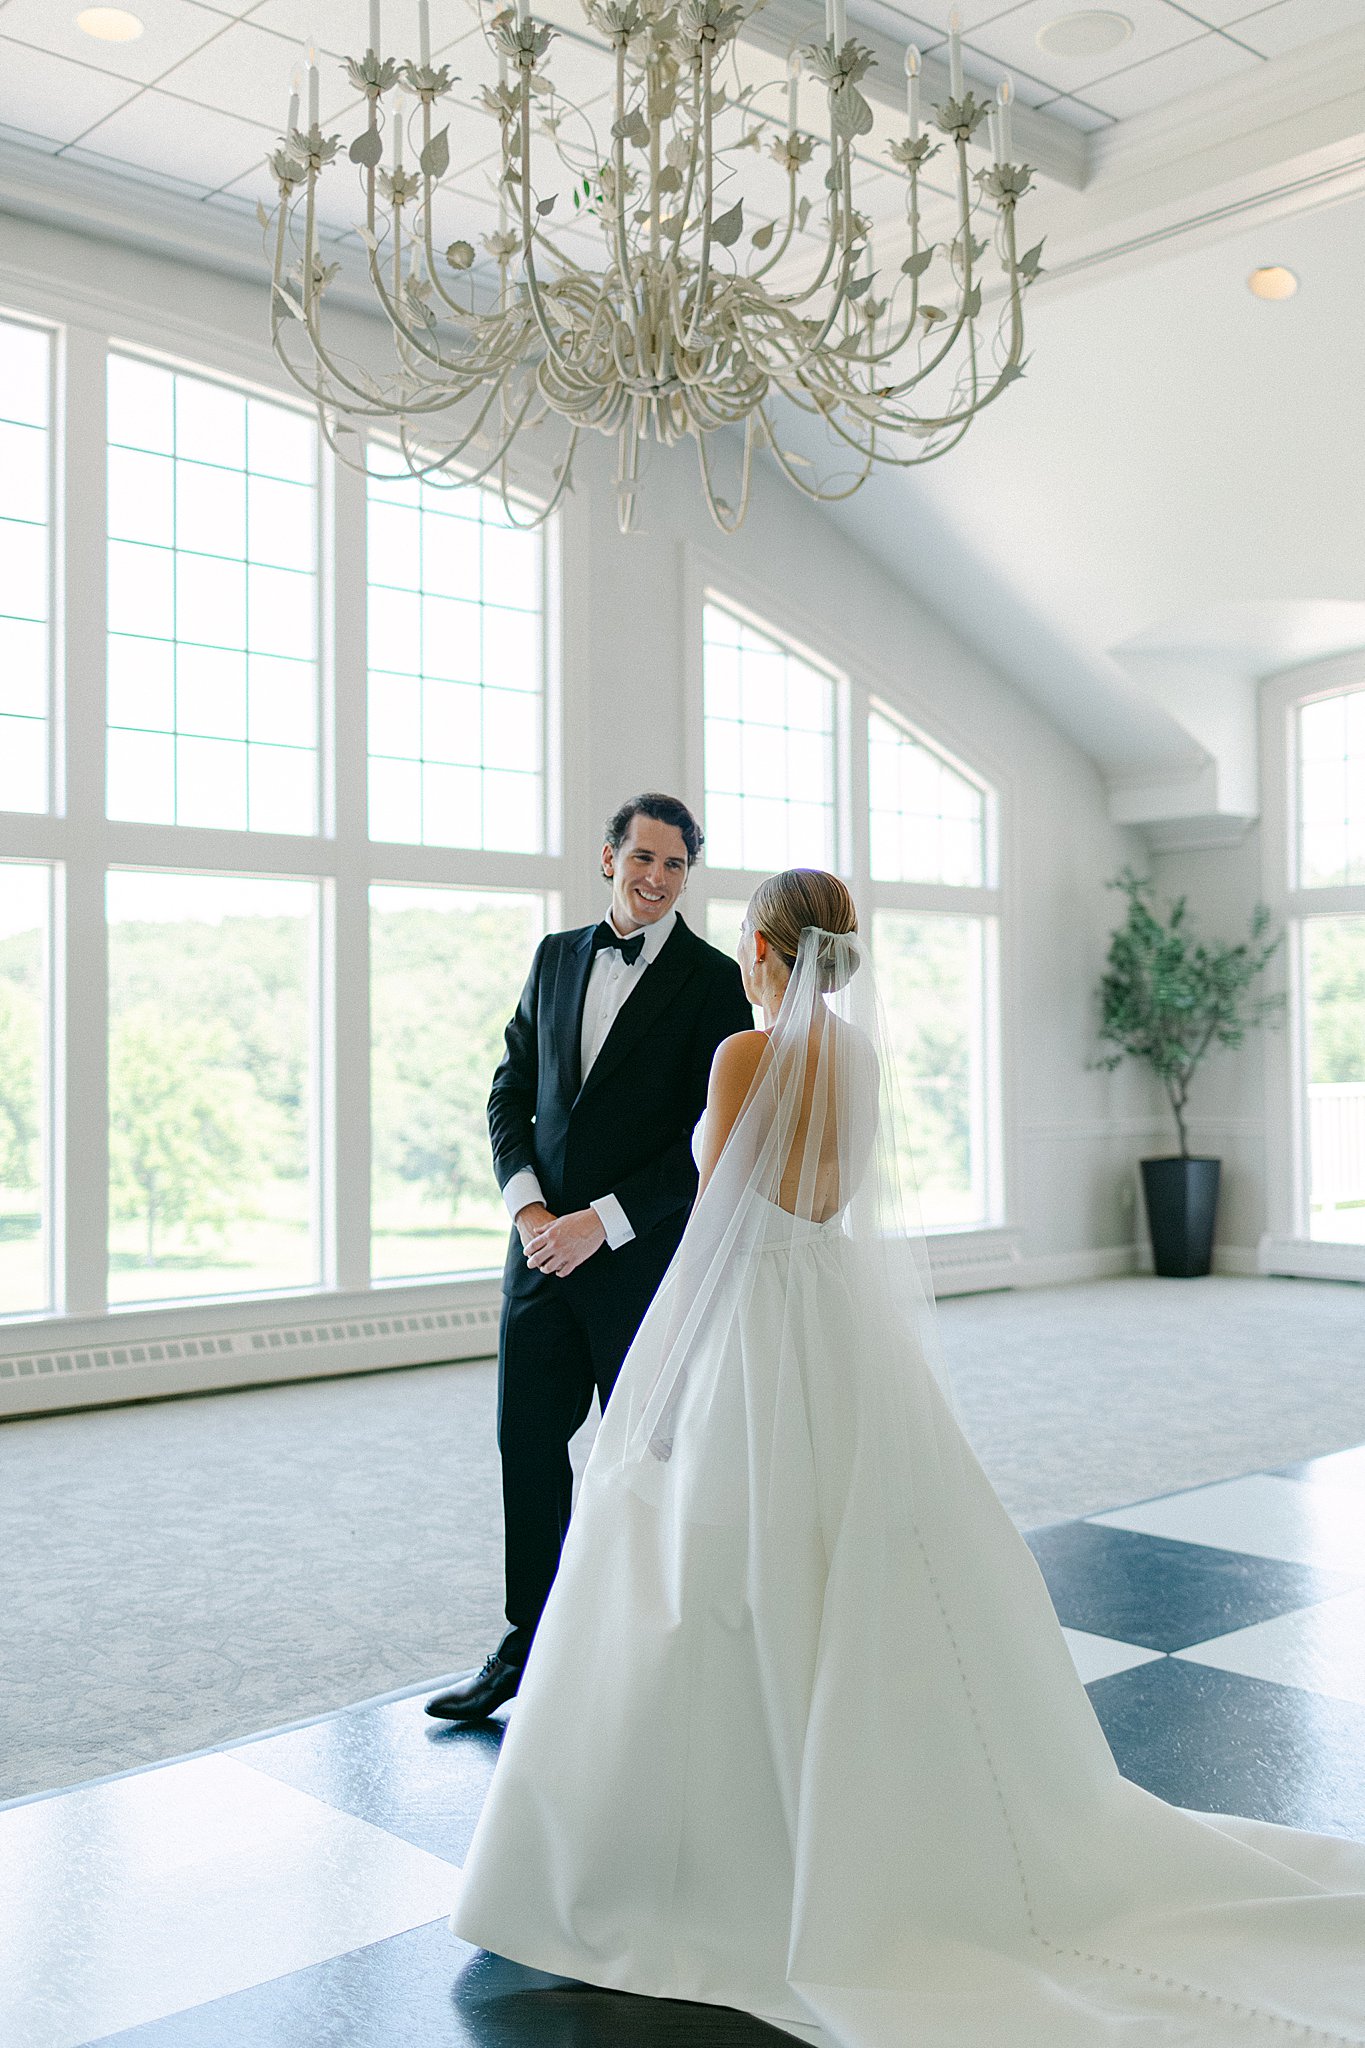 Emily & Clark on their wedding day at Oneida Golf & Country Club and Why we think a first look is a must-have on your wedding day.